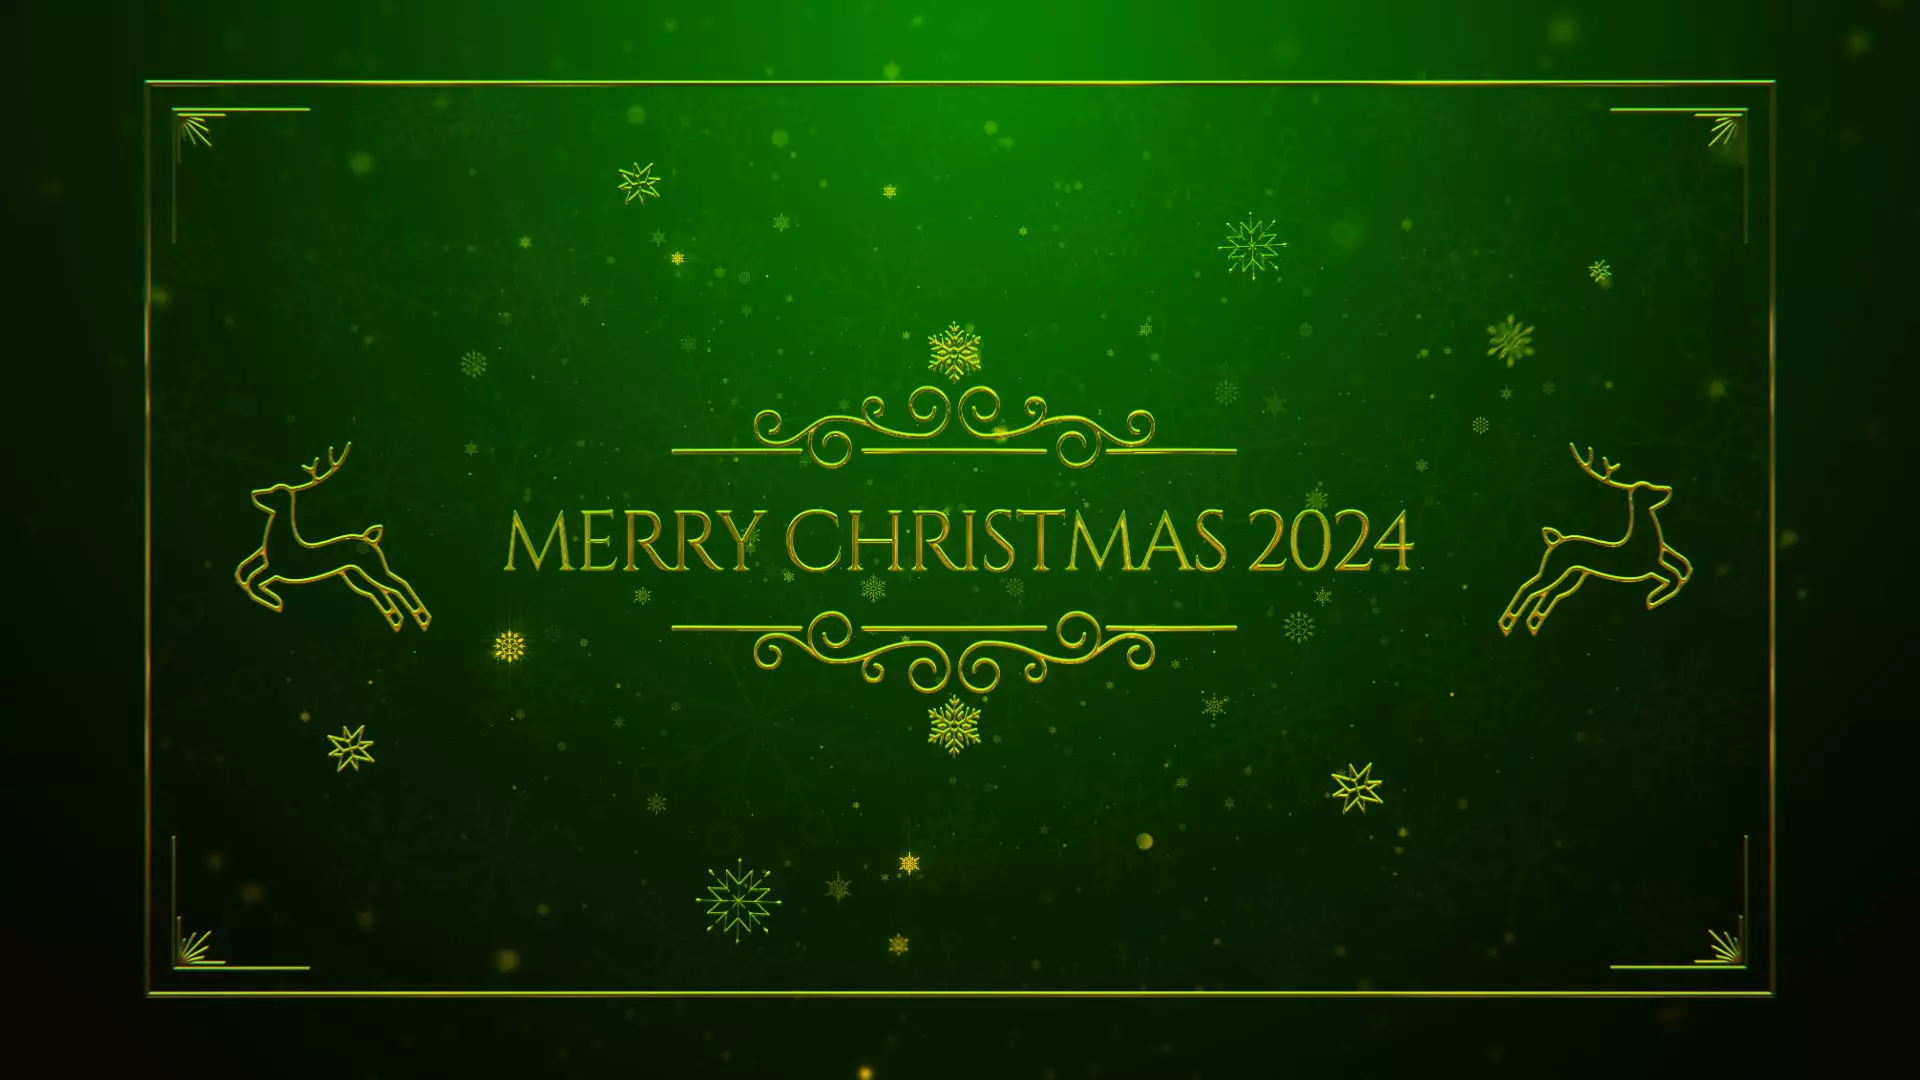 Merry Christmas images 2024 free download_2024_374_1